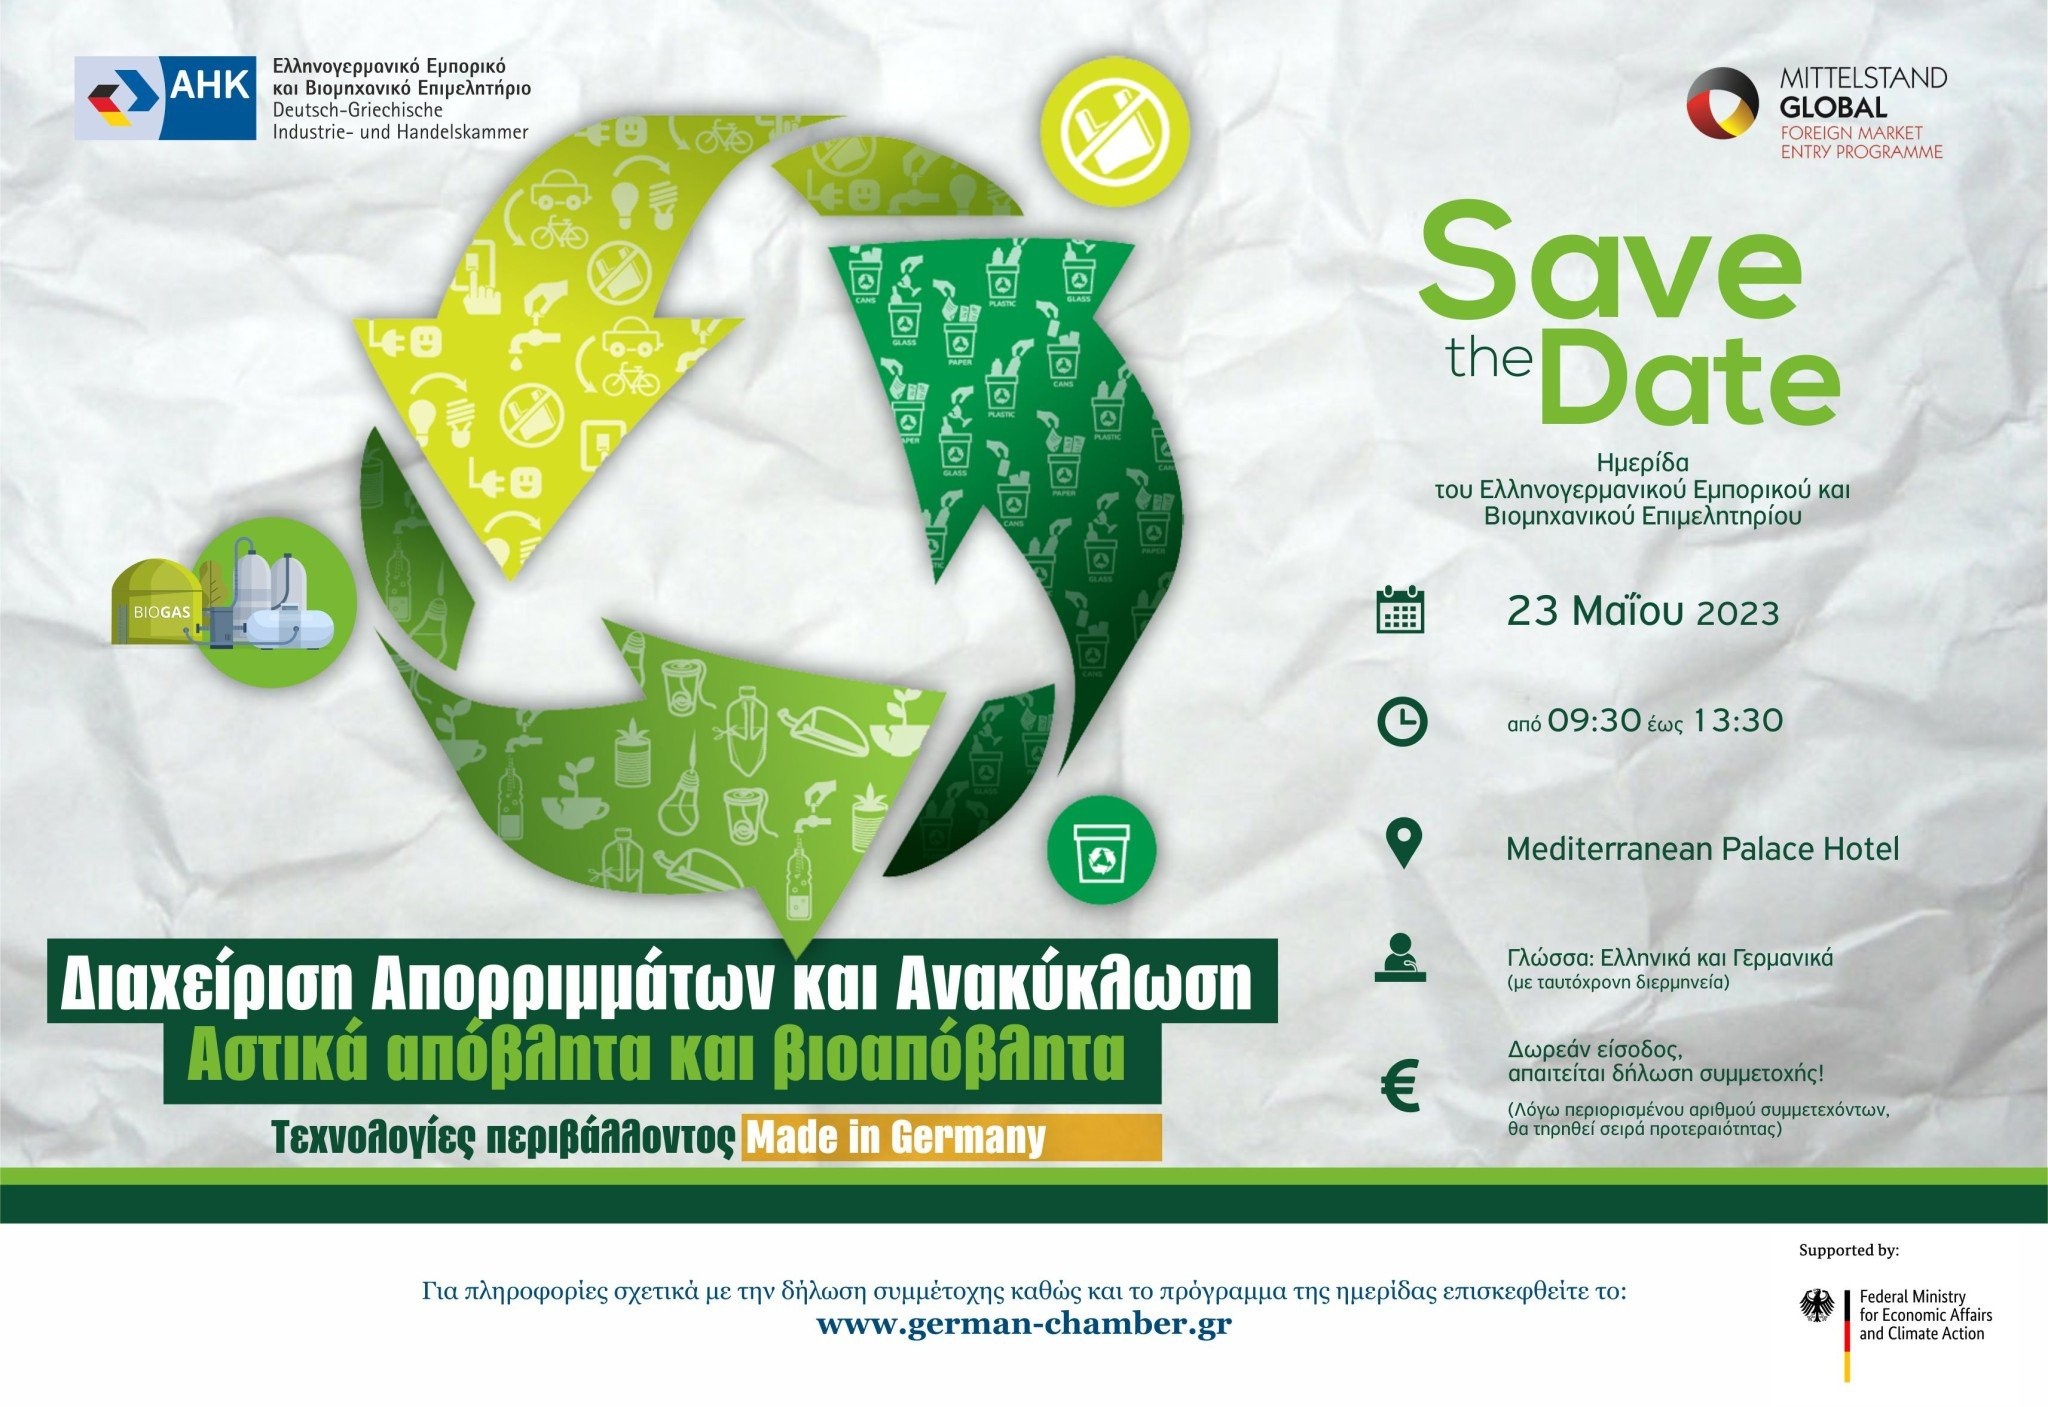 save-the-date-23-05-2023.jpg